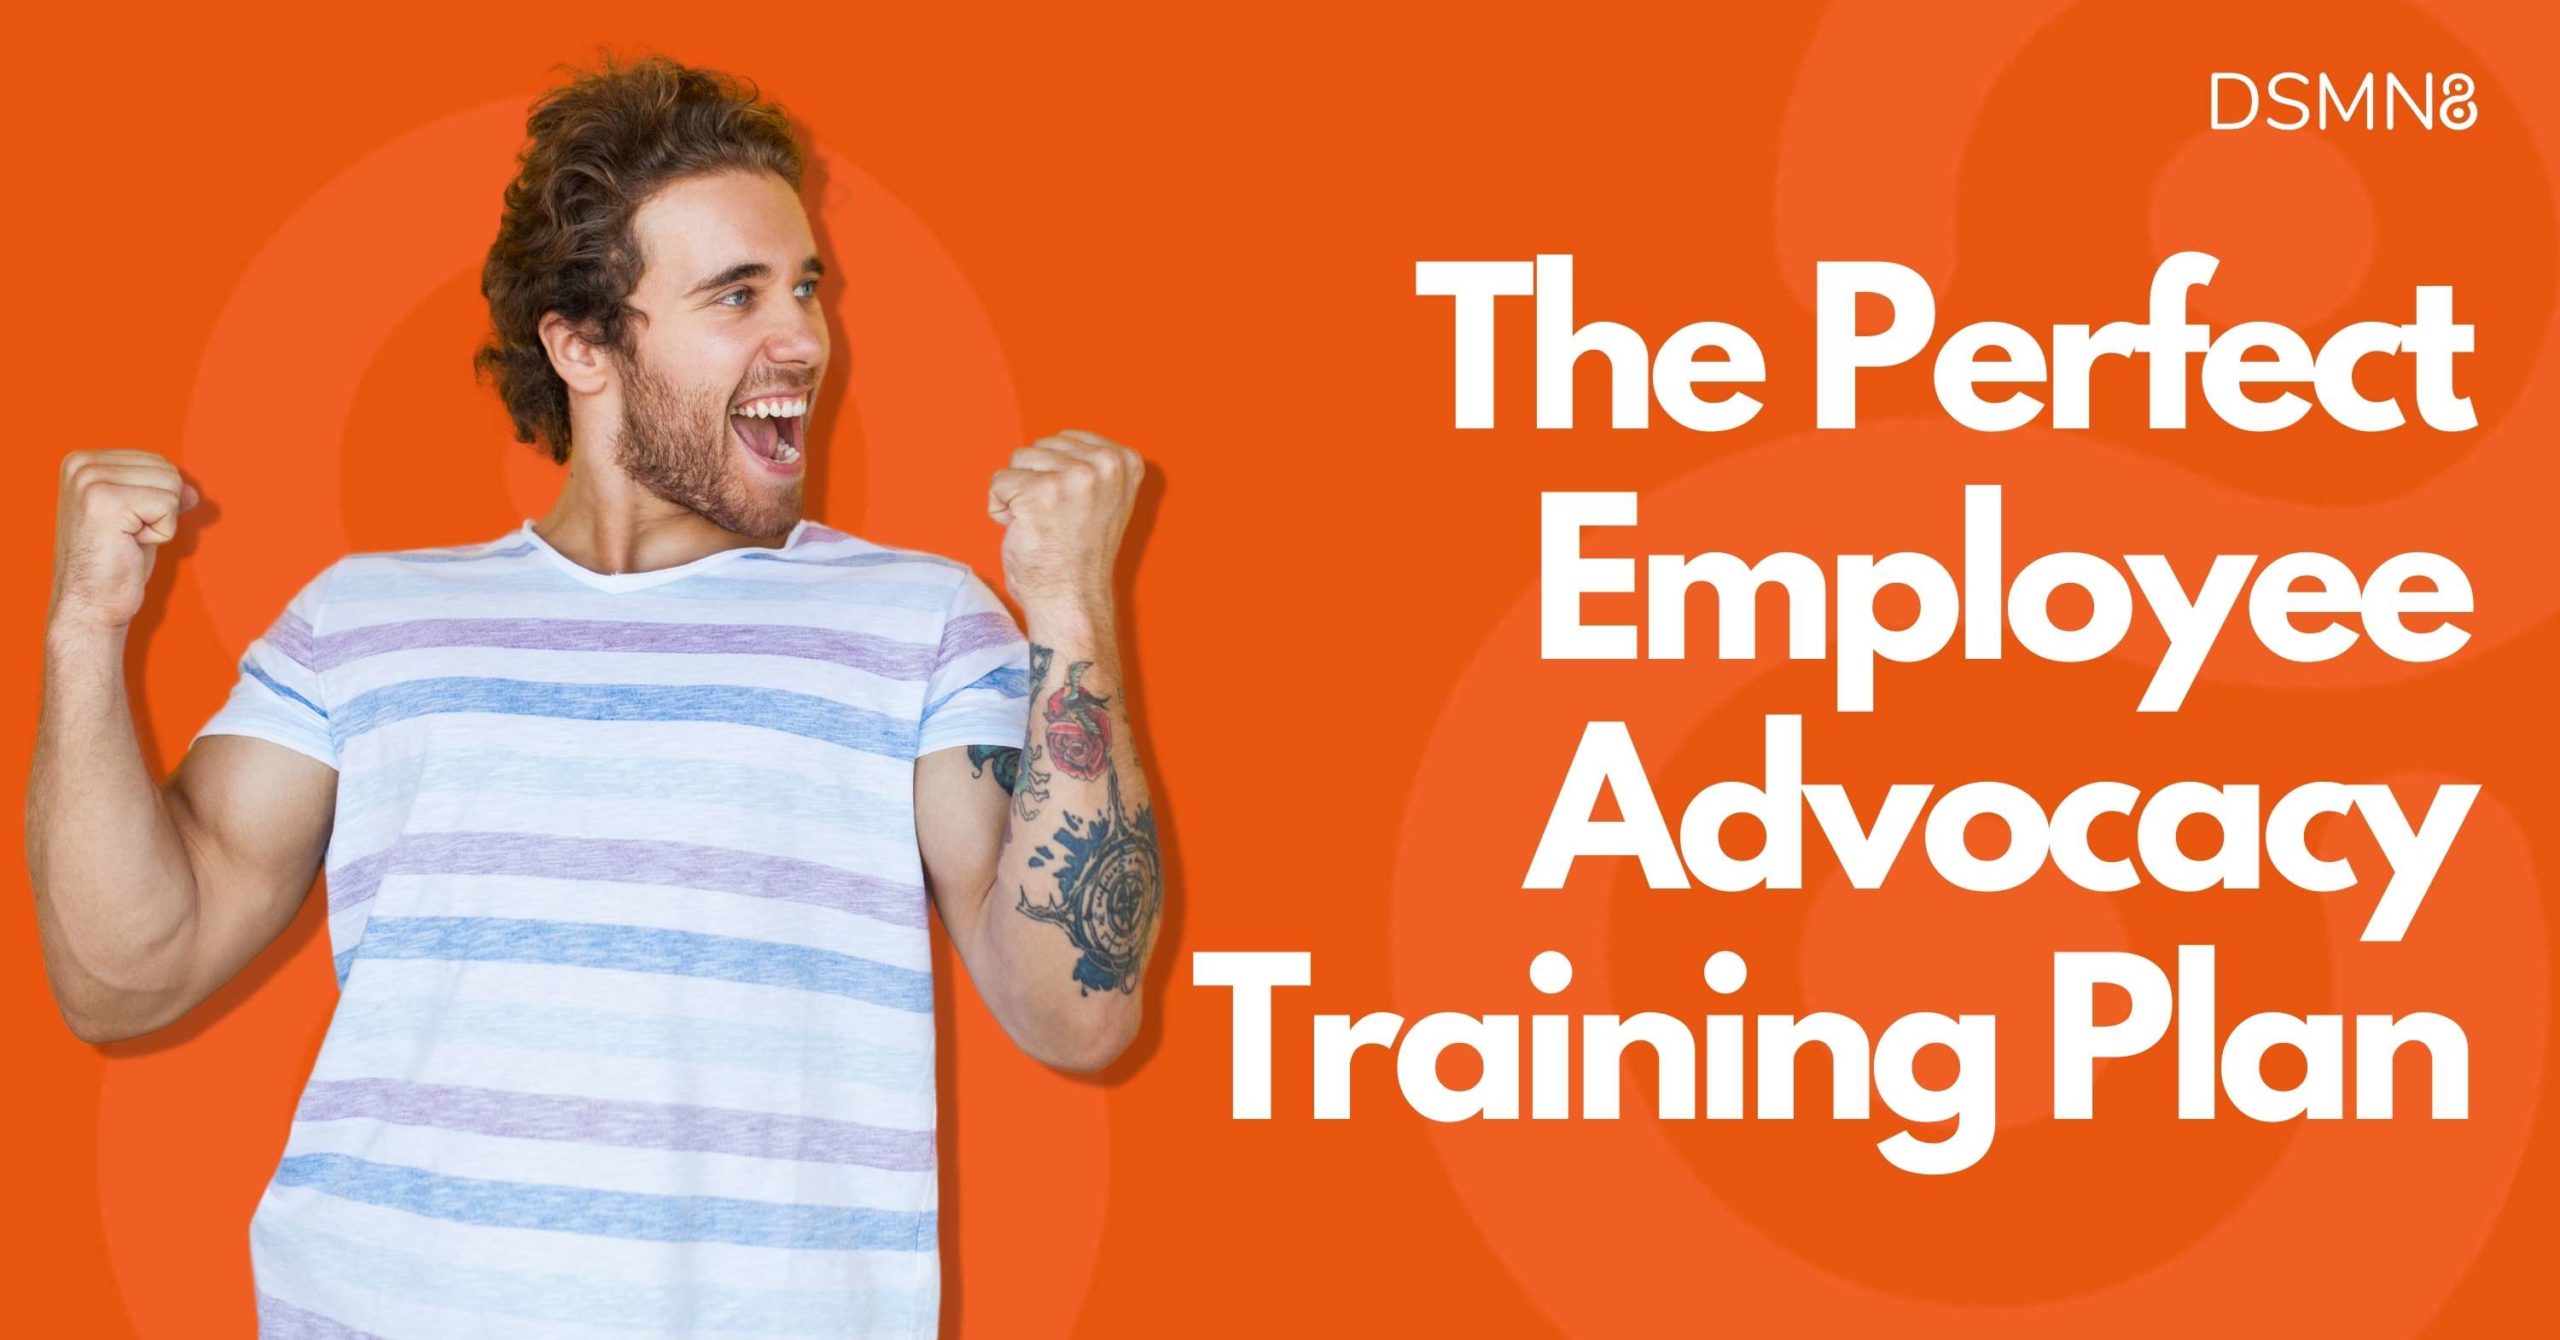 The Perfect Employee Advocacy Training Plan